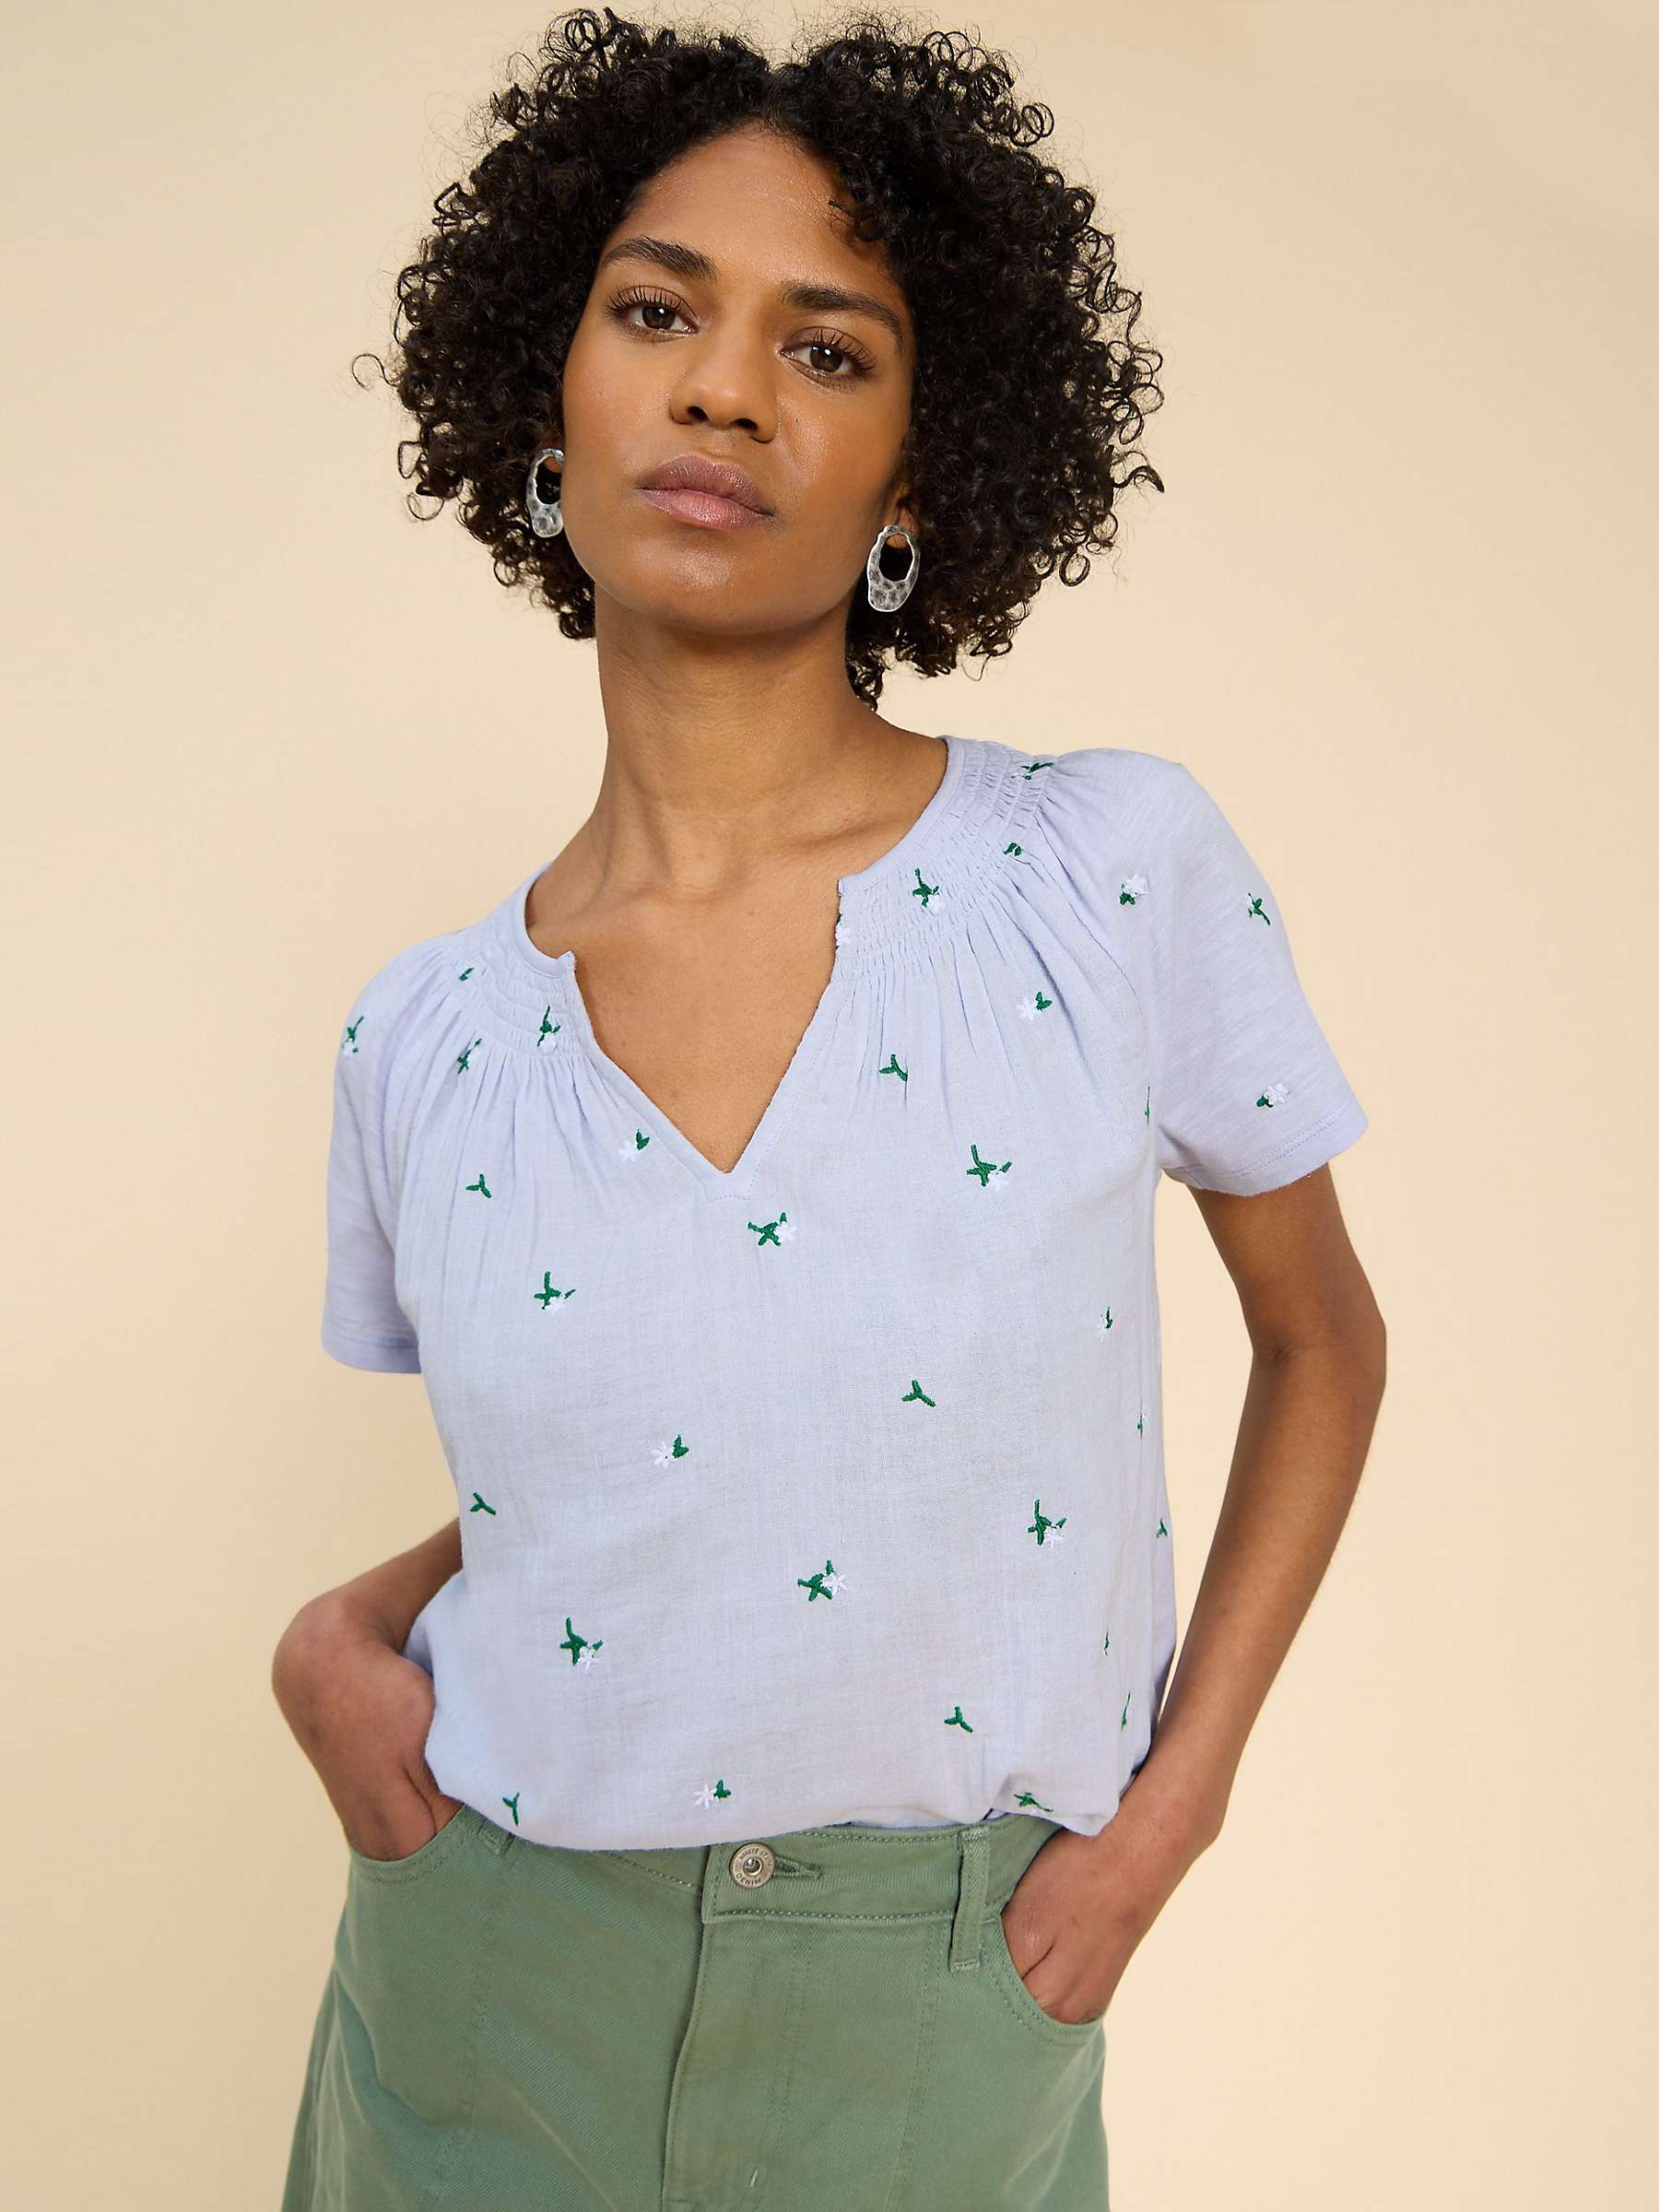 Buy White Stuff Luella Floral Embroidery Cotton T-Shirt, Mid Blue/Multi Online at johnlewis.com